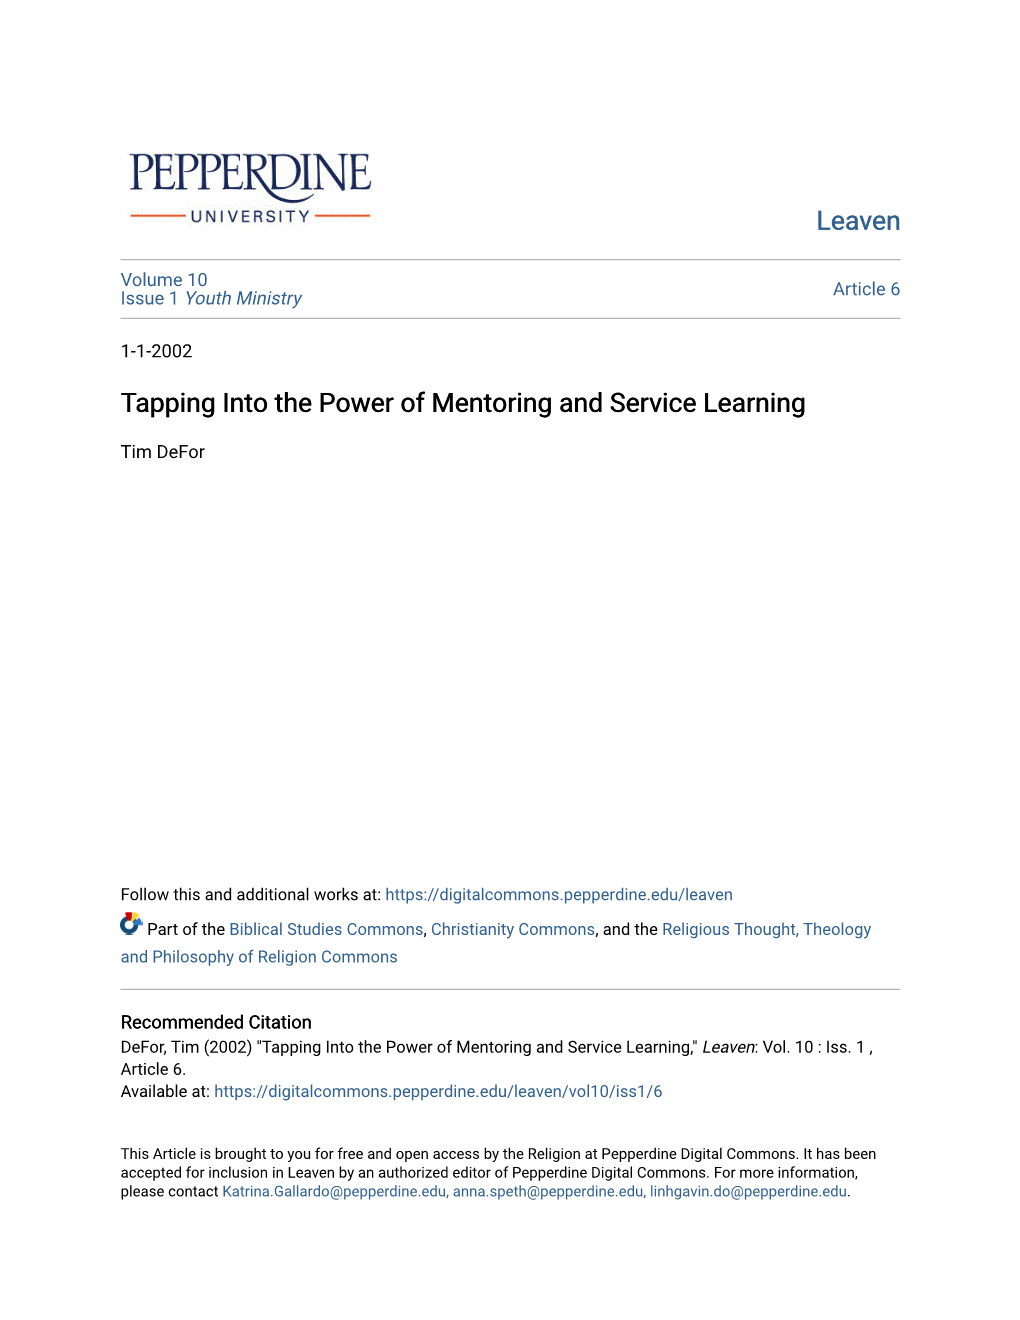 Tapping Into the Power of Mentoring and Service Learning